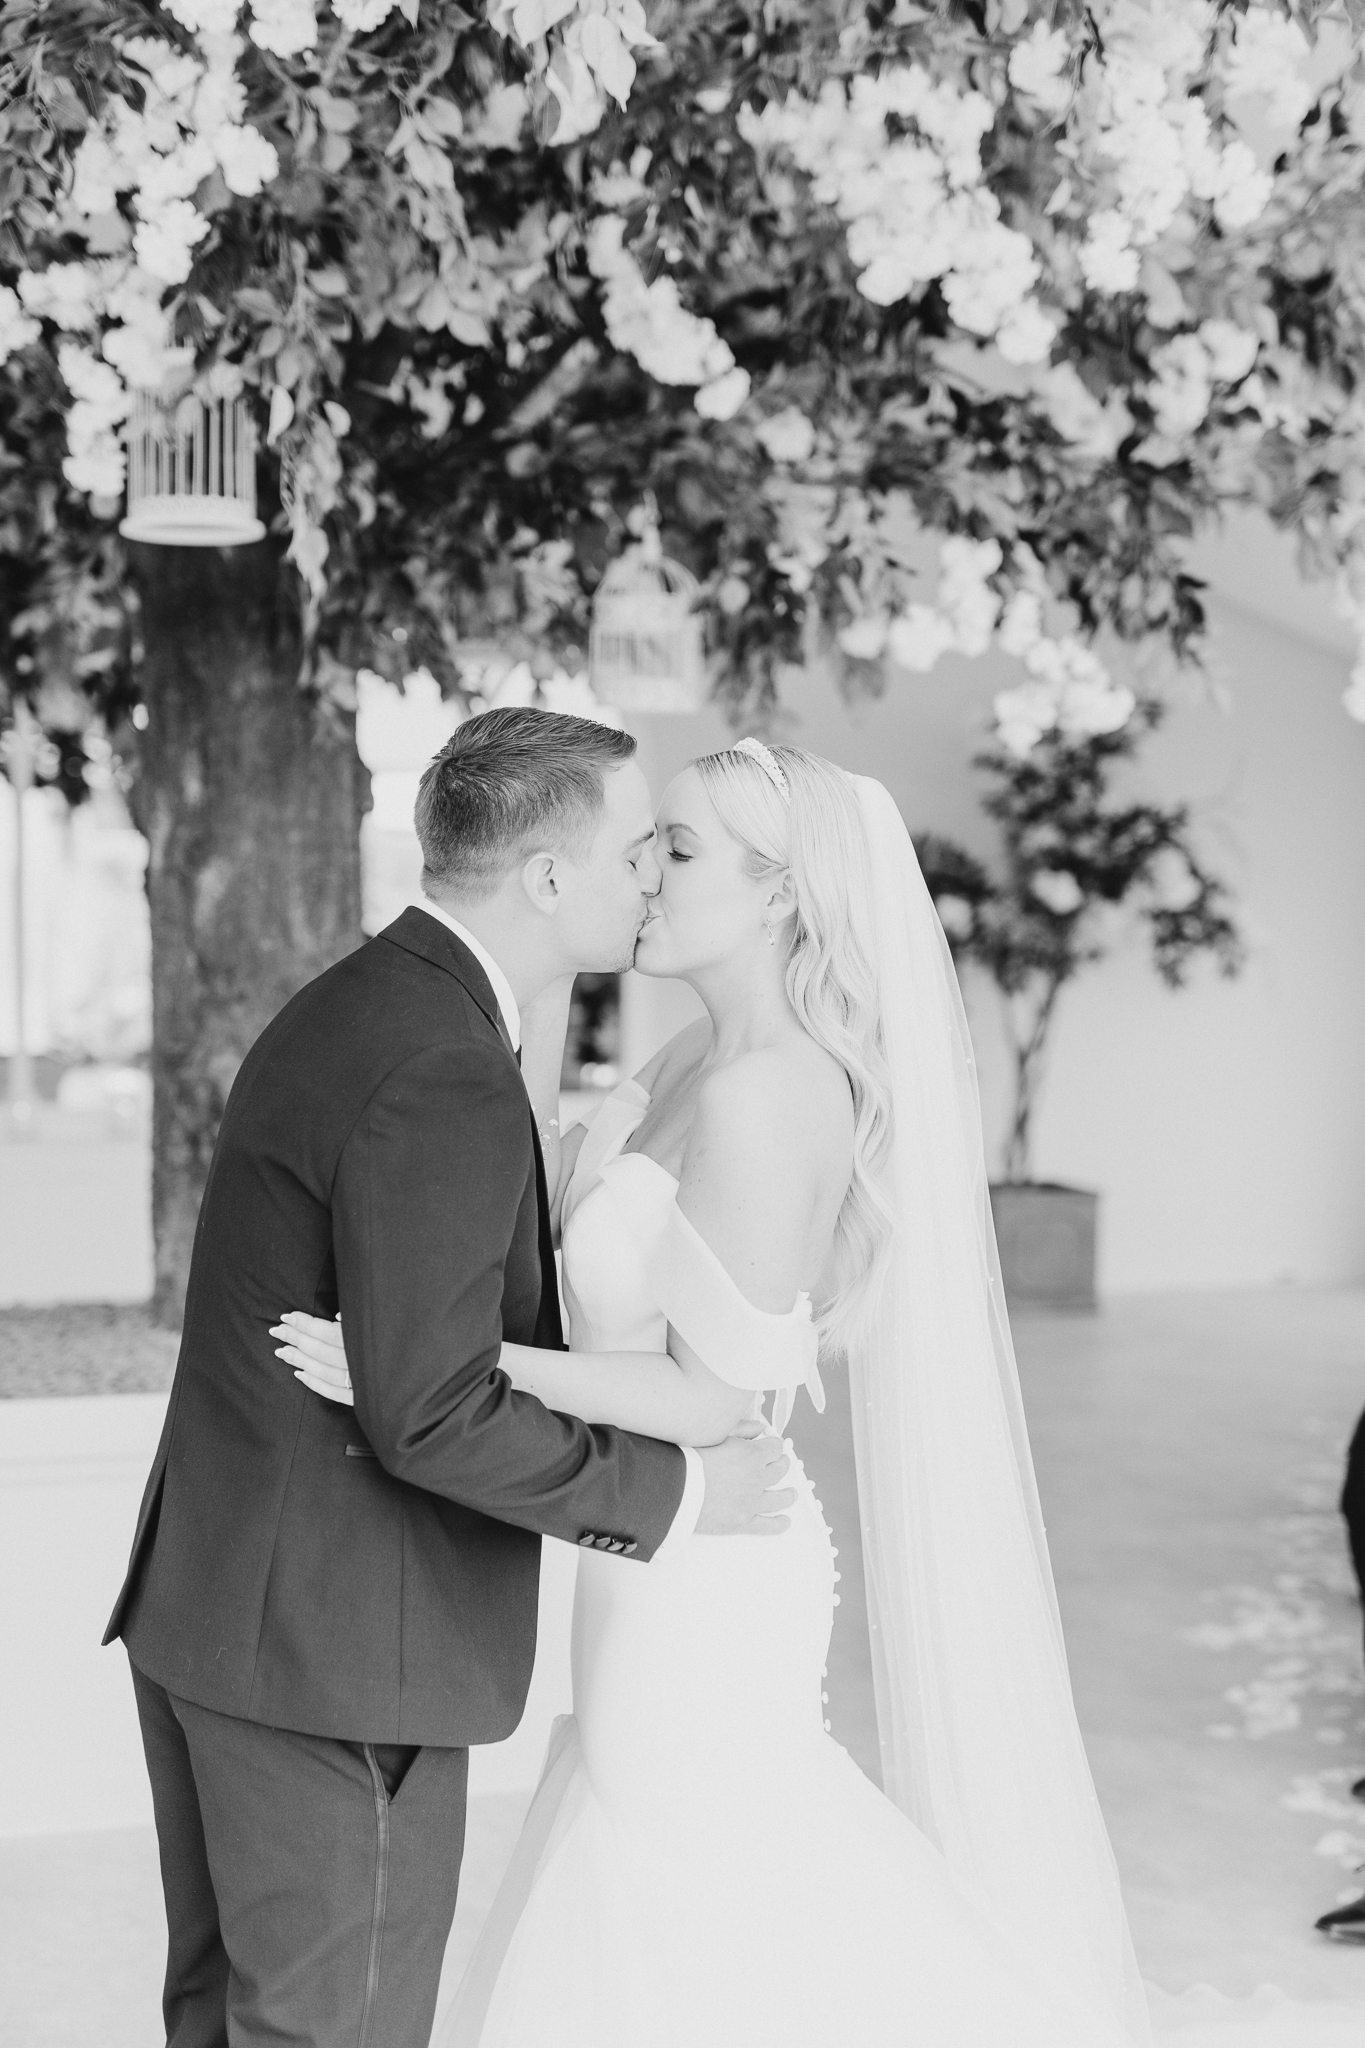 Kelsey and Spencer's first kiss captured by Cheshire wedding photographer, Sophie Siddons at Combermere Abbey